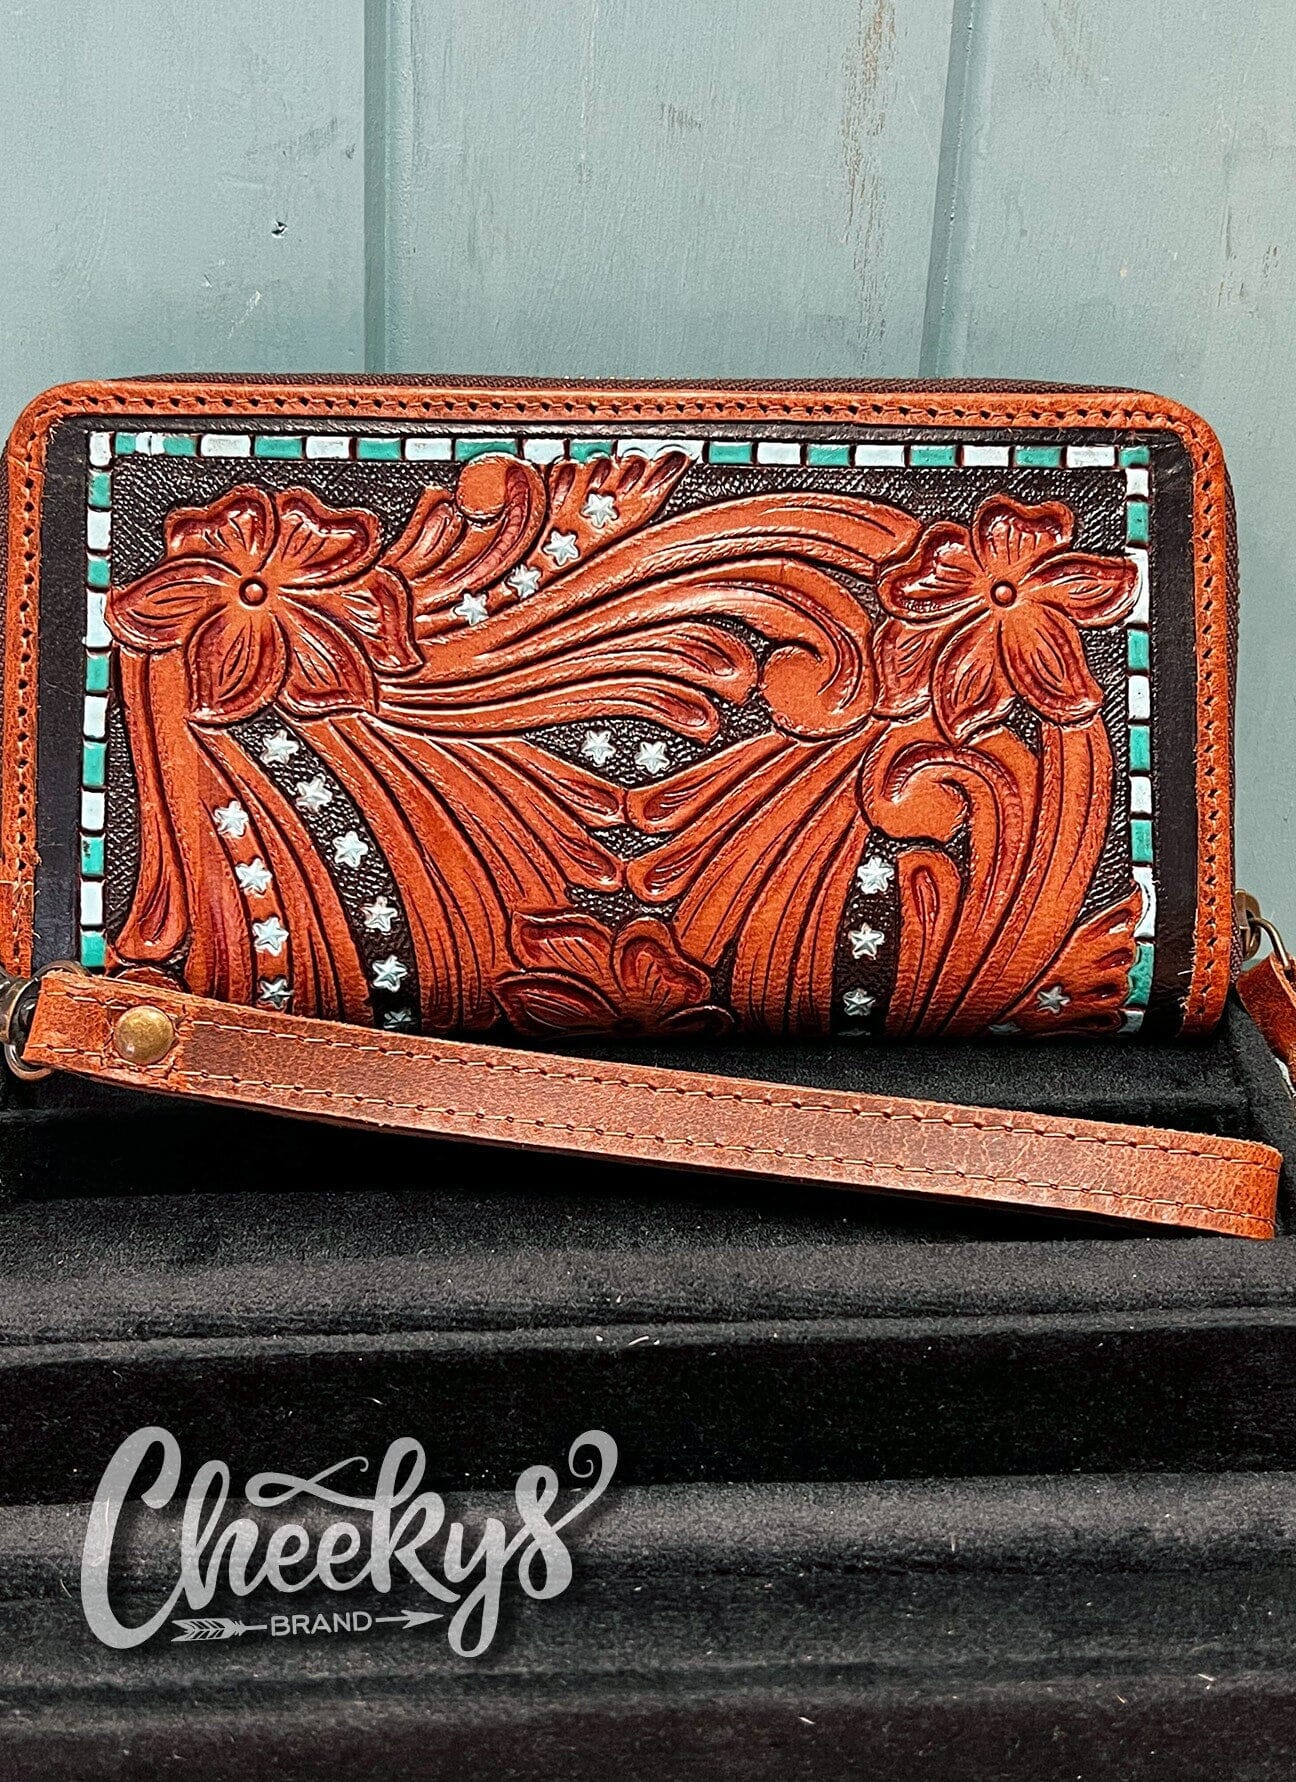 Star Line Tooled Turquoise Wallet/Clutch Cheekys Brand 